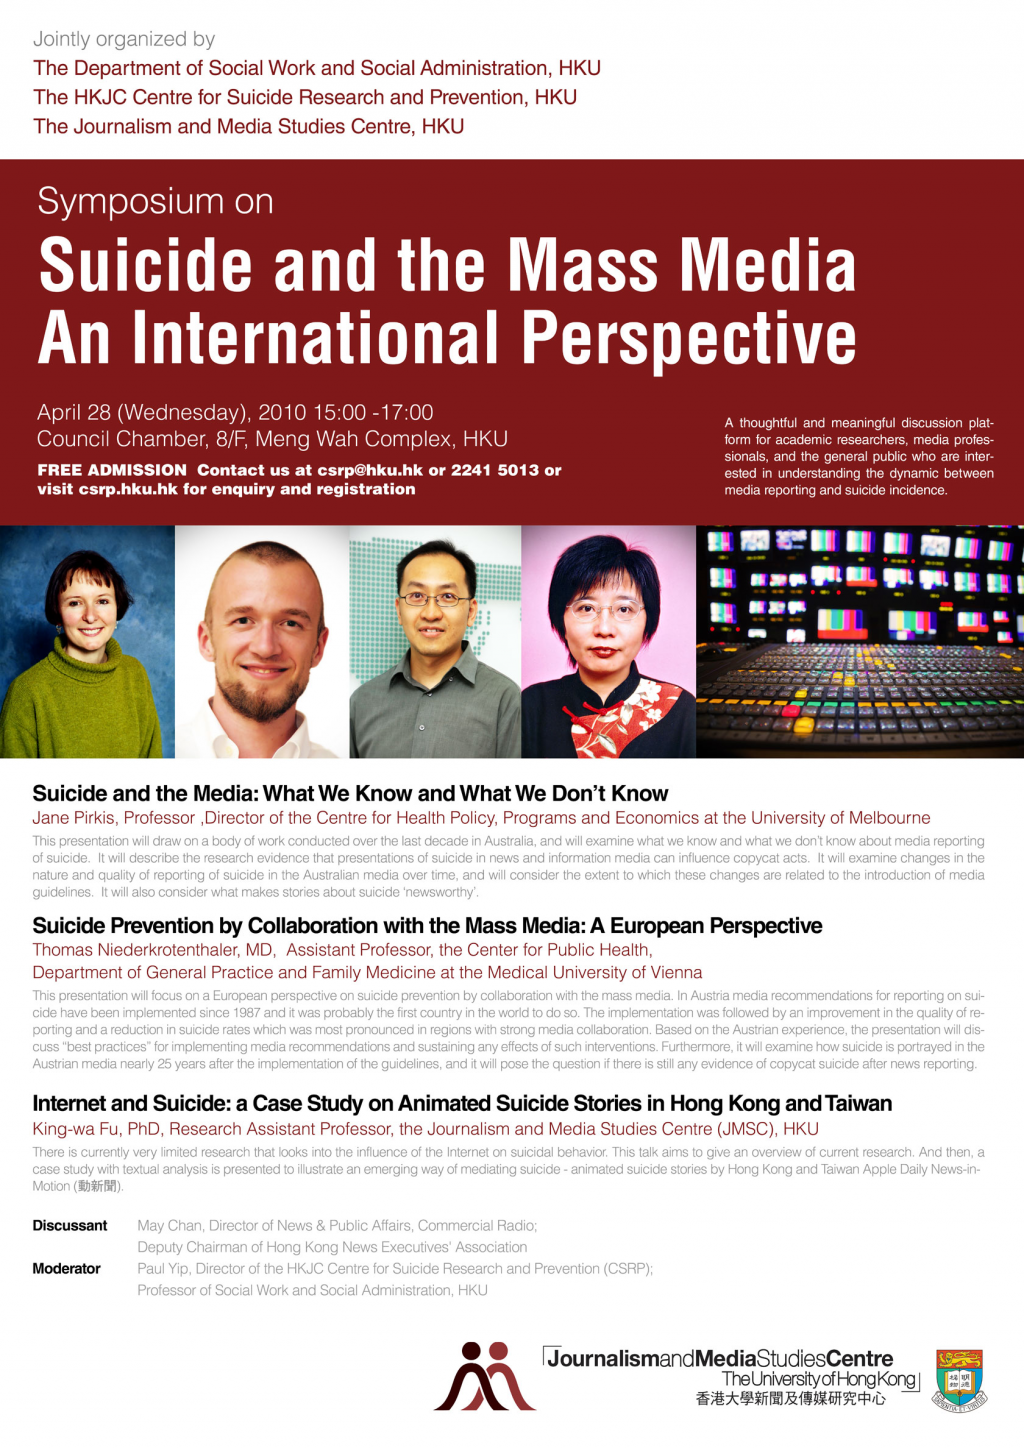 Symposium on Suicide and the Mass Media An International Perspective